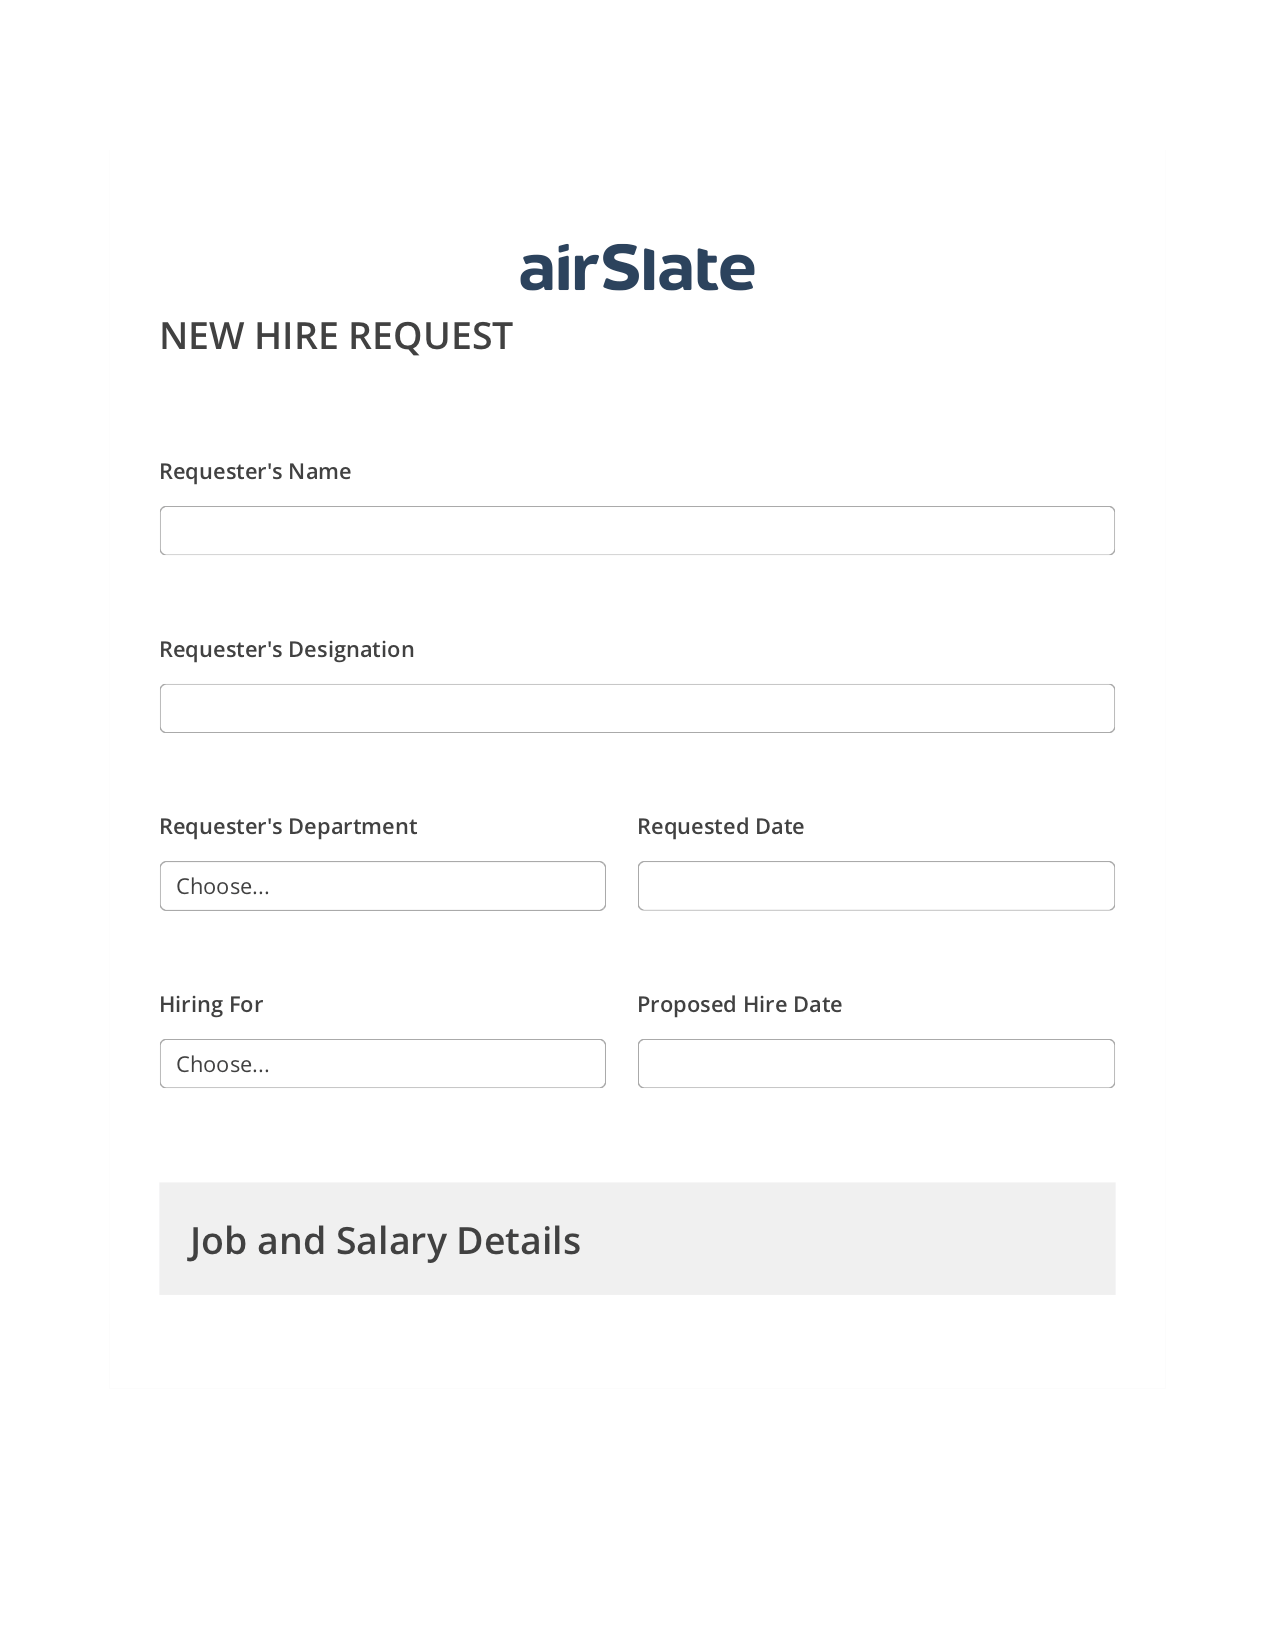 Hiring Request Workflow Pre-fill from MS Dynamics 365 Records, Create slate from another Flow Bot, Export to WebMerge Bot